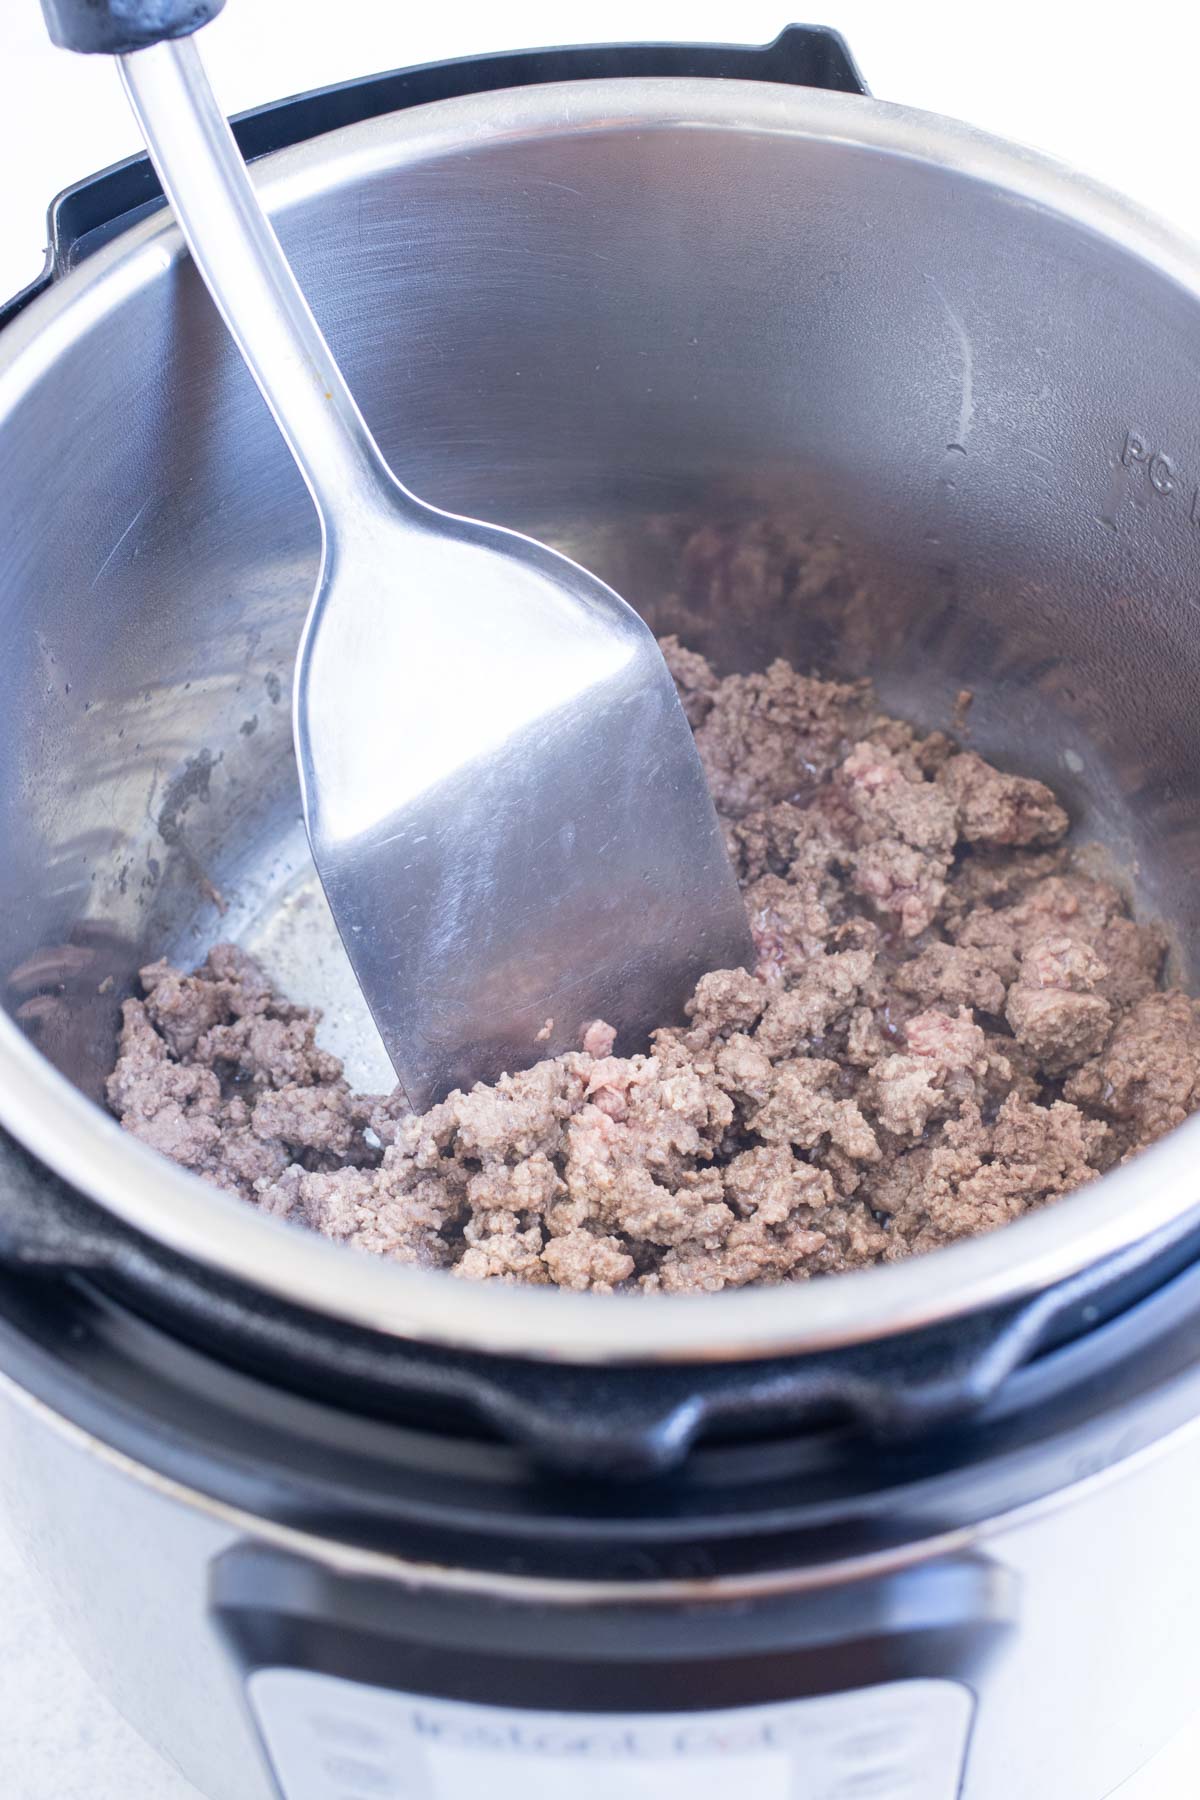 Ground beef is cooked in an Instant Pot.